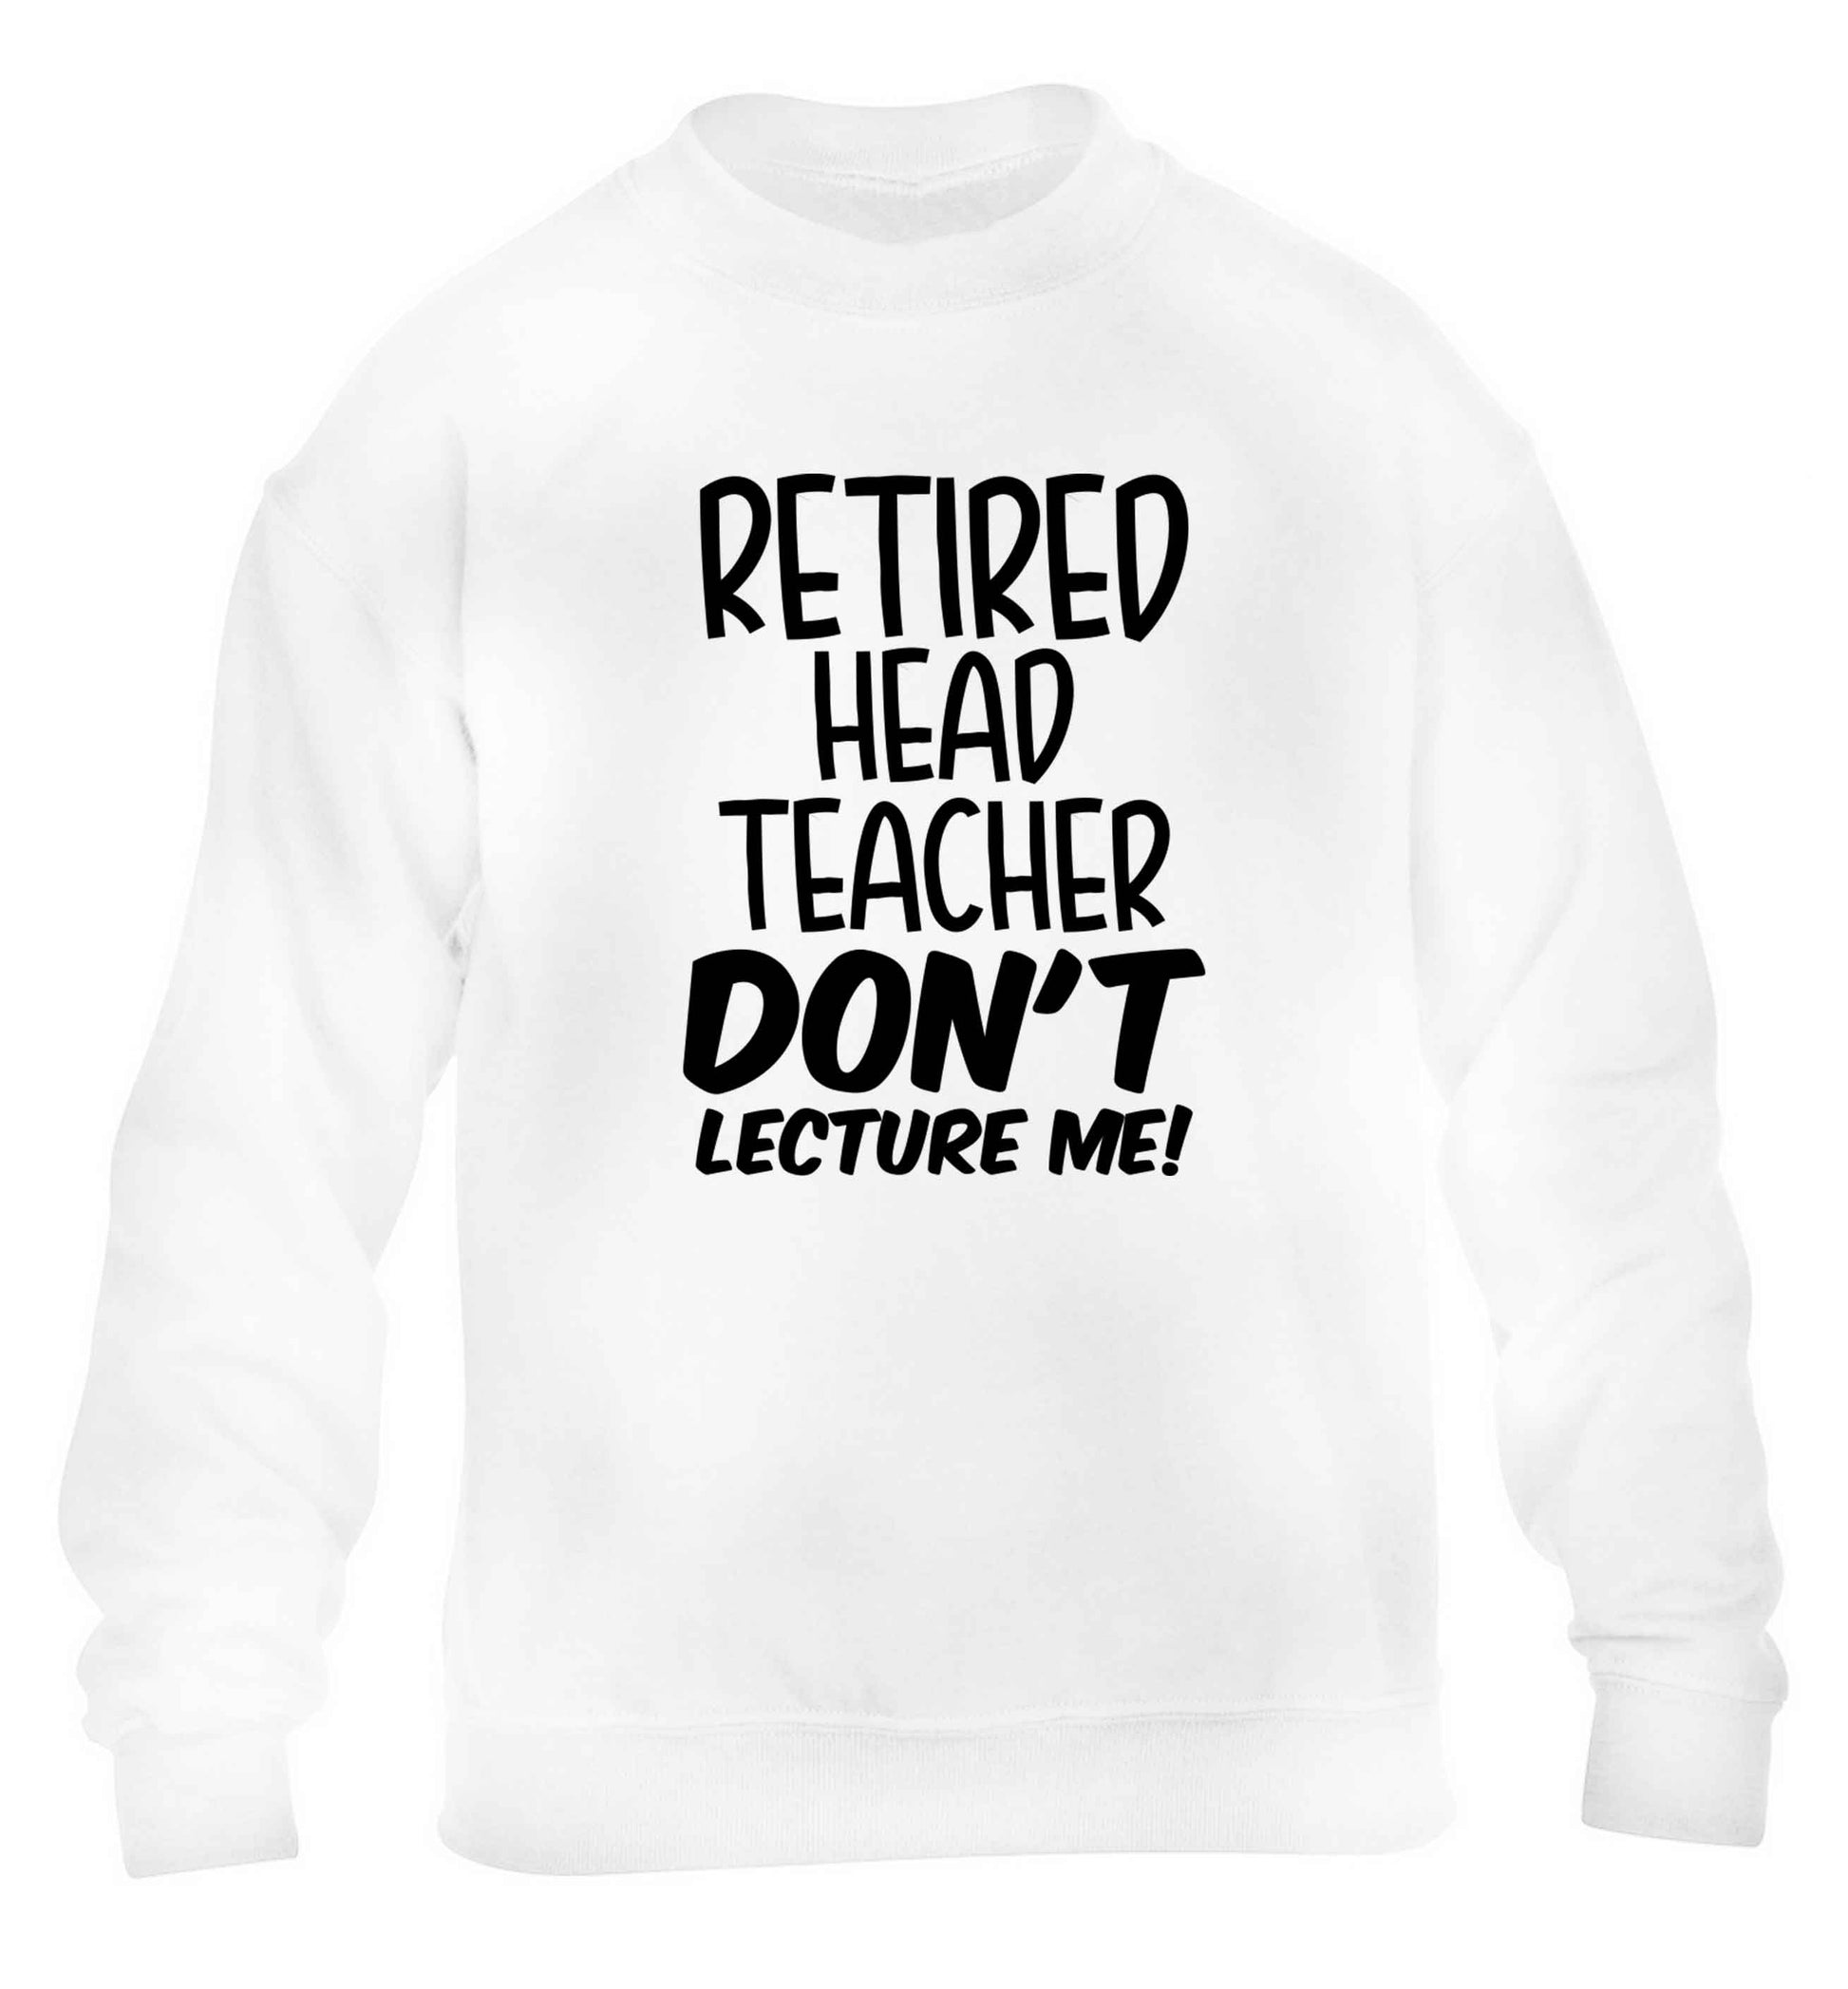 Retired head teacher don't lecture me! children's white sweater 12-13 Years